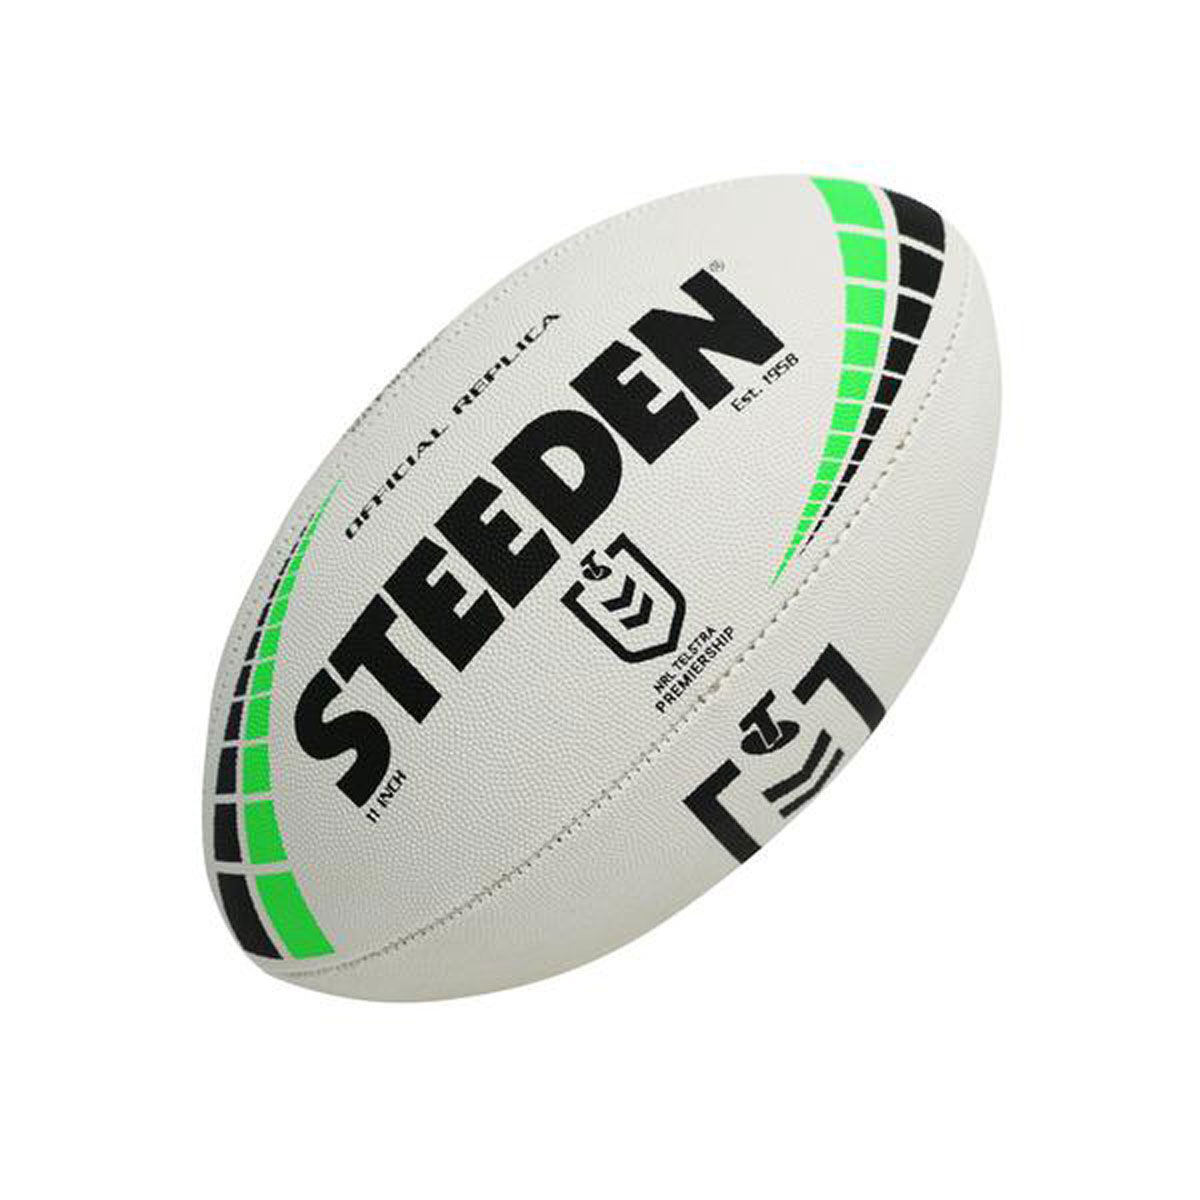 2021 State Of Origin Steeden Rugby League Ball Size 11 Inch! 